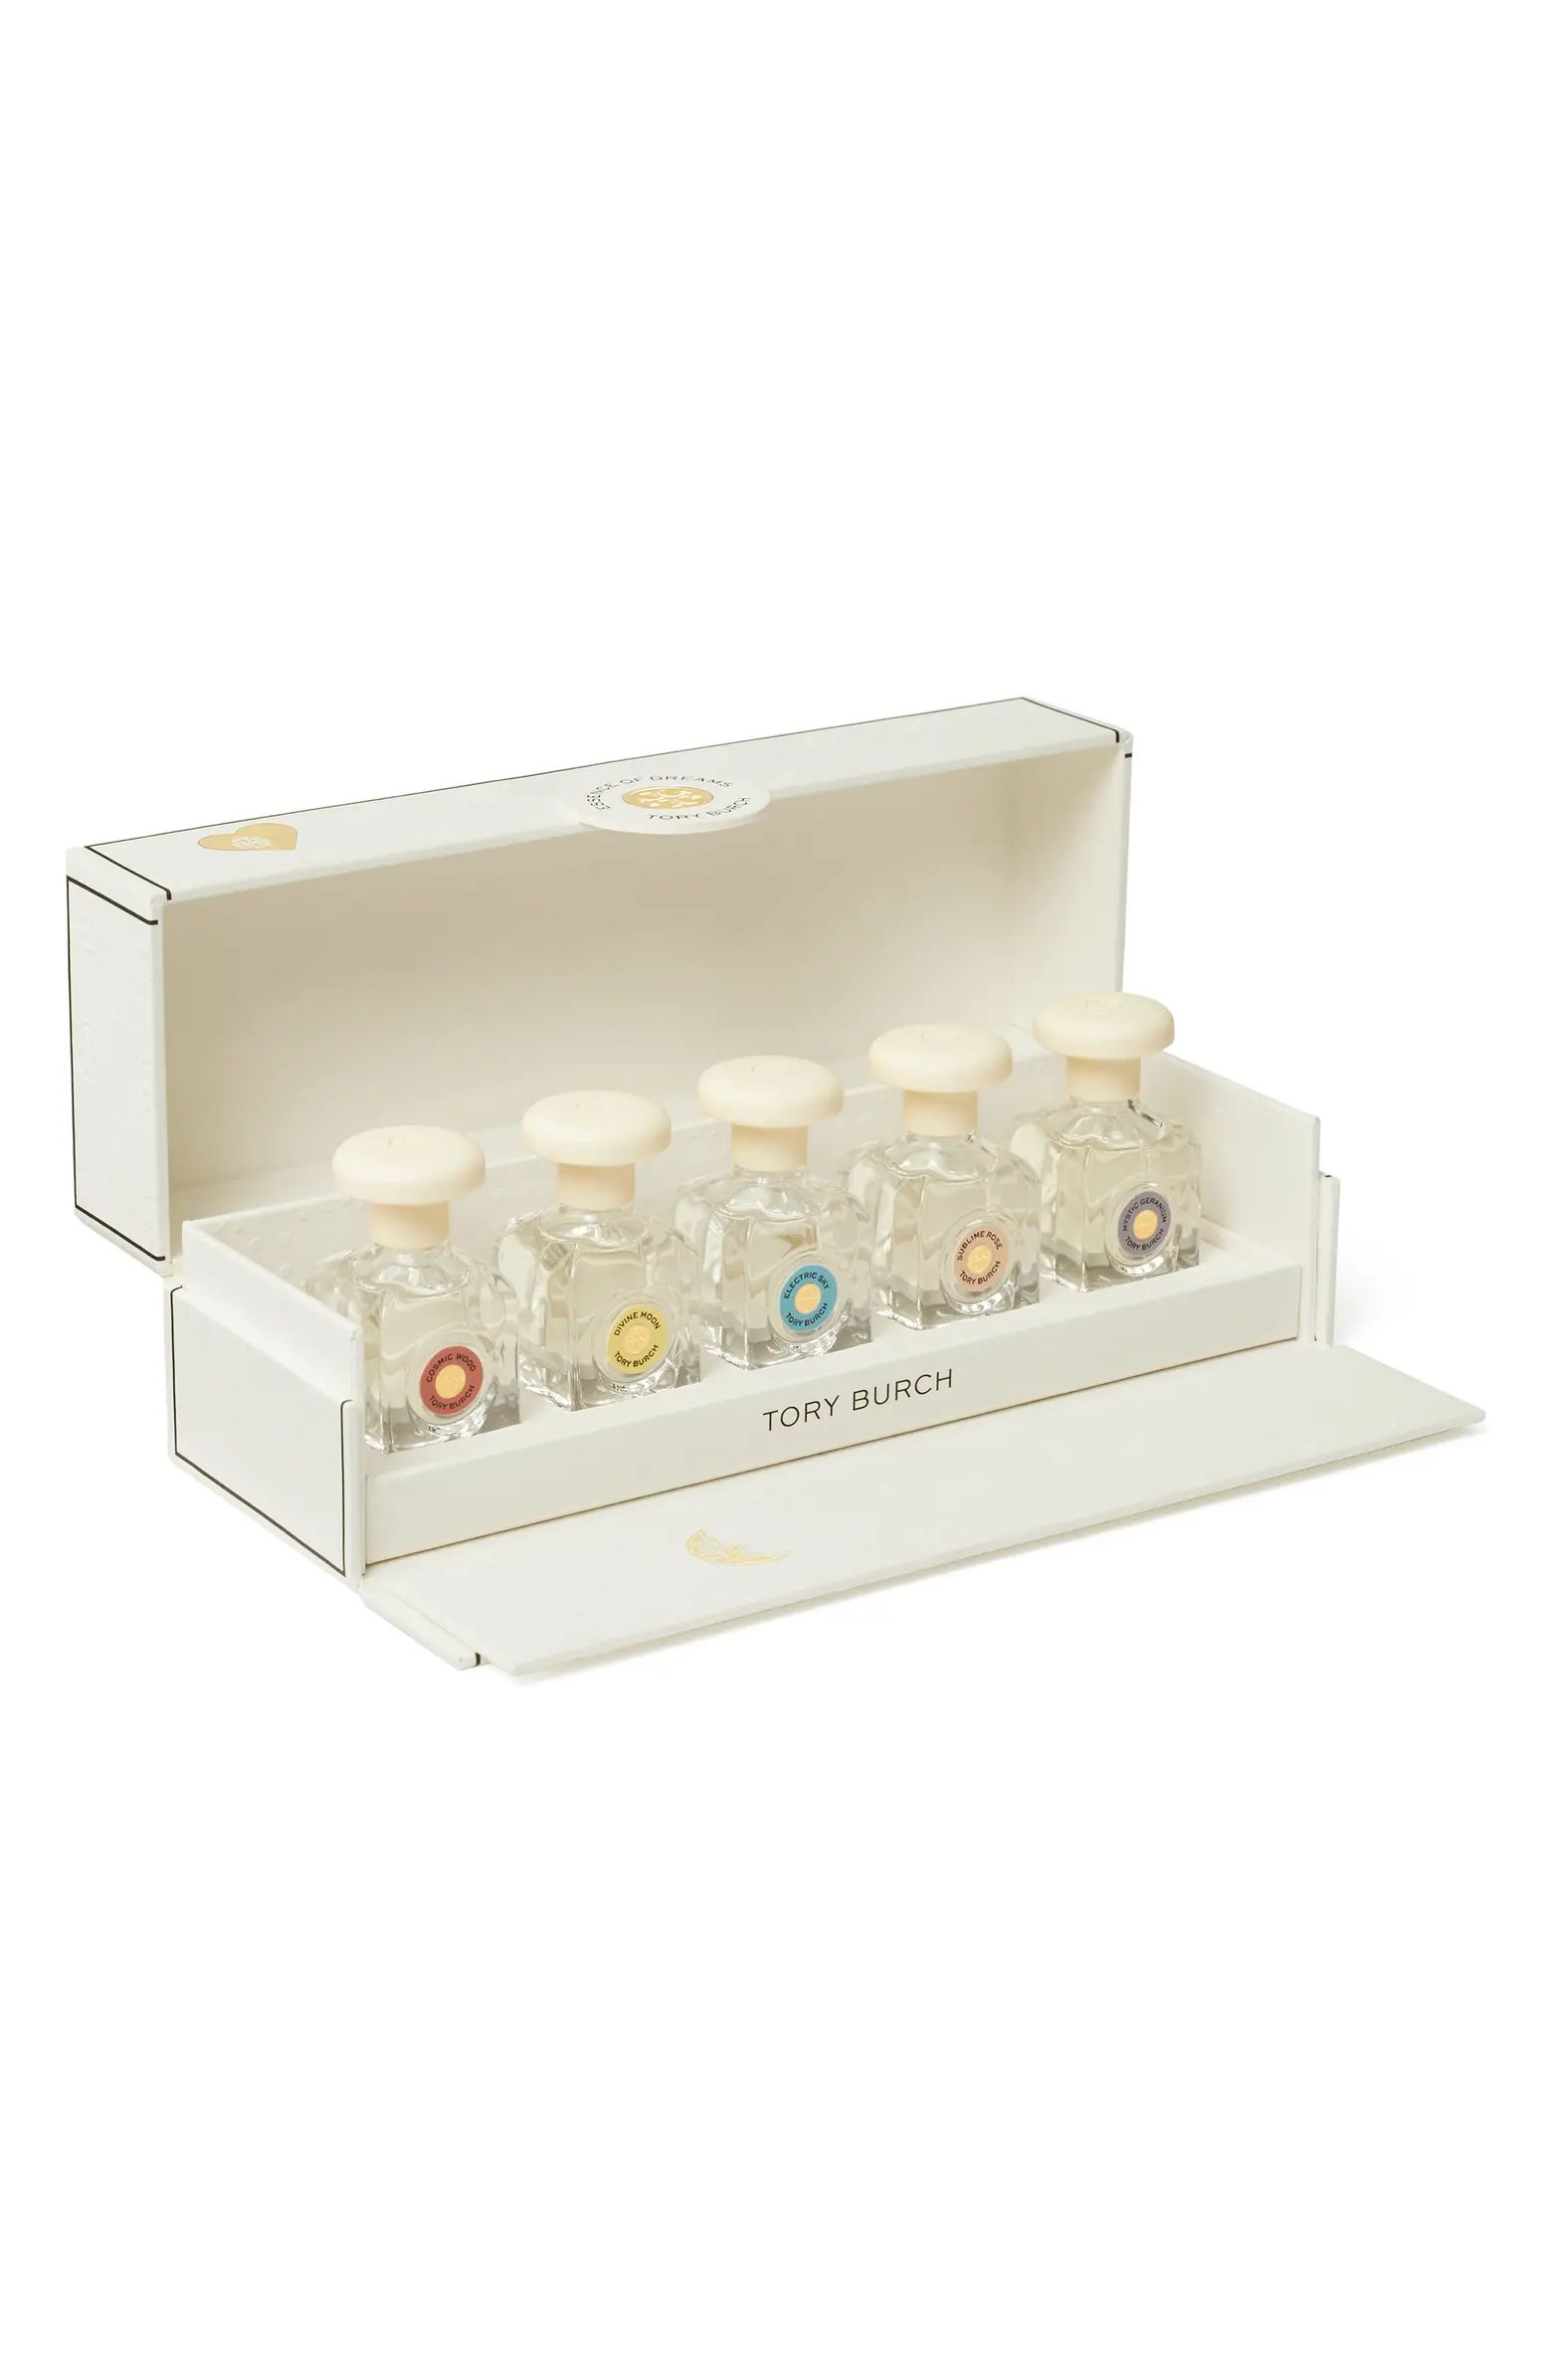 Essence of Dreams Fragrance Discovery Set | Nordstrom